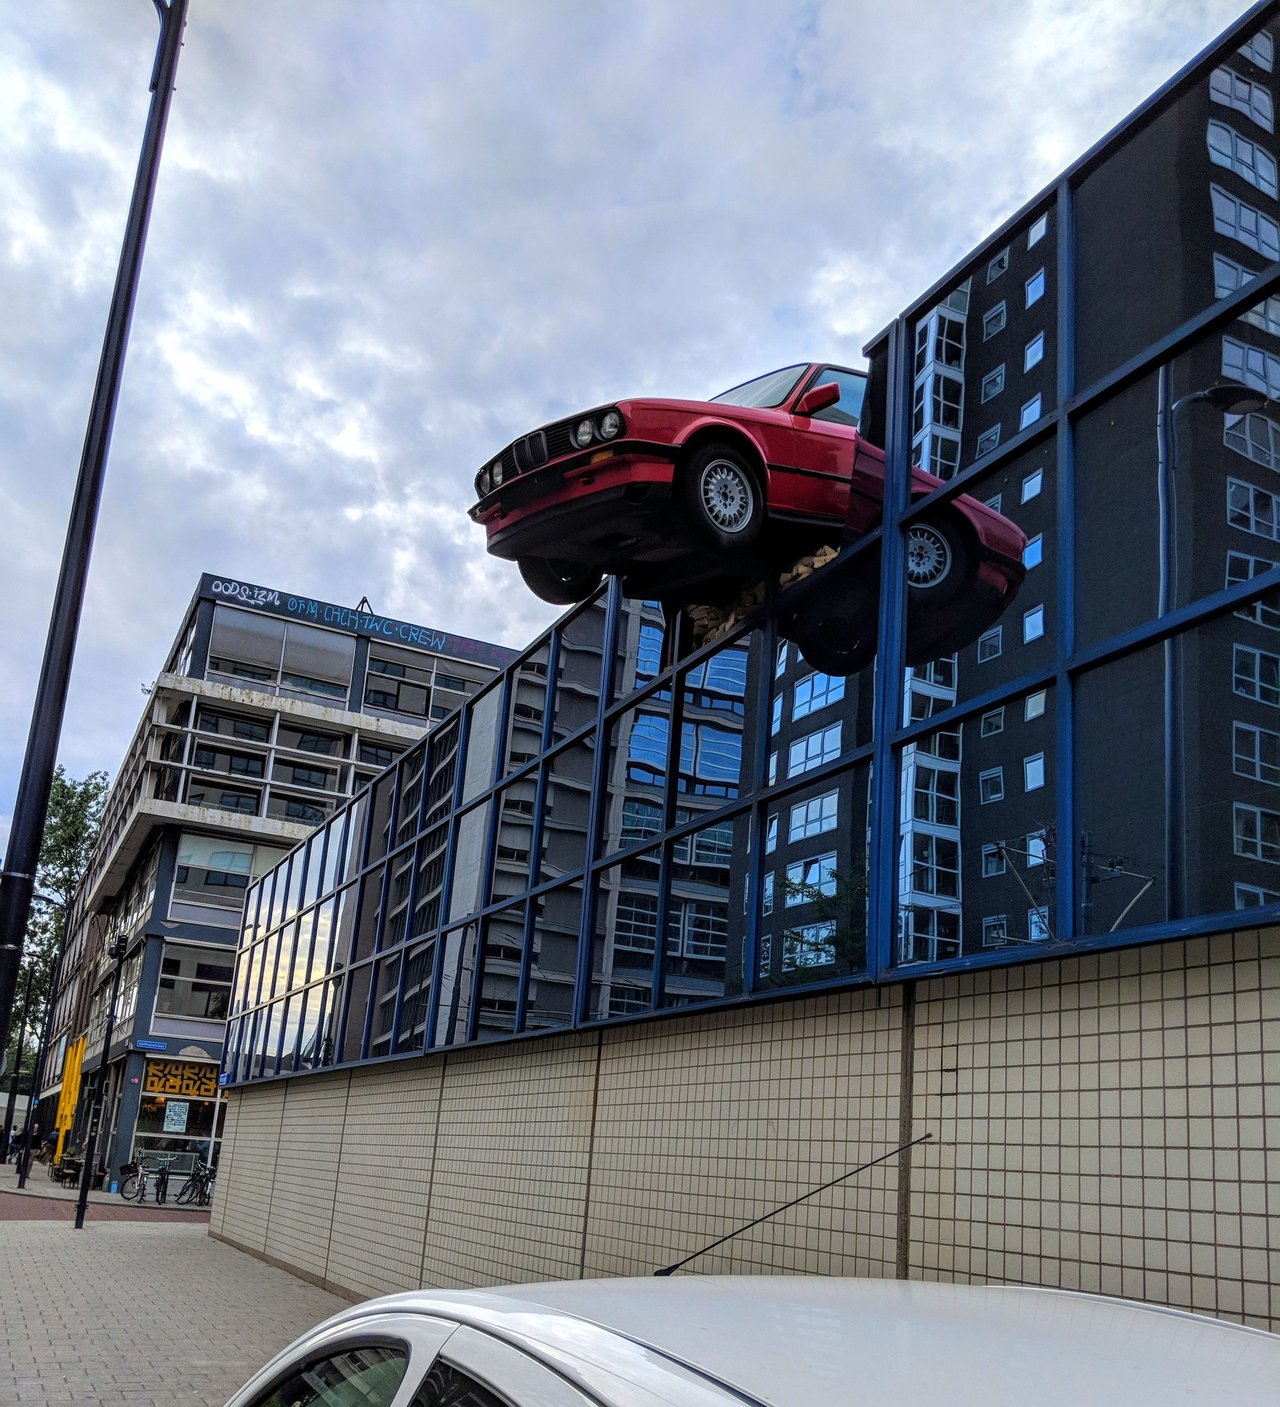 Art installation or crazy close call?         _________________________________⠀⠀ #travel #car #installation #explore #rotterdam #netherlands #cars #holiday #cityscape #art https://t.co/8NwCIQoUUm